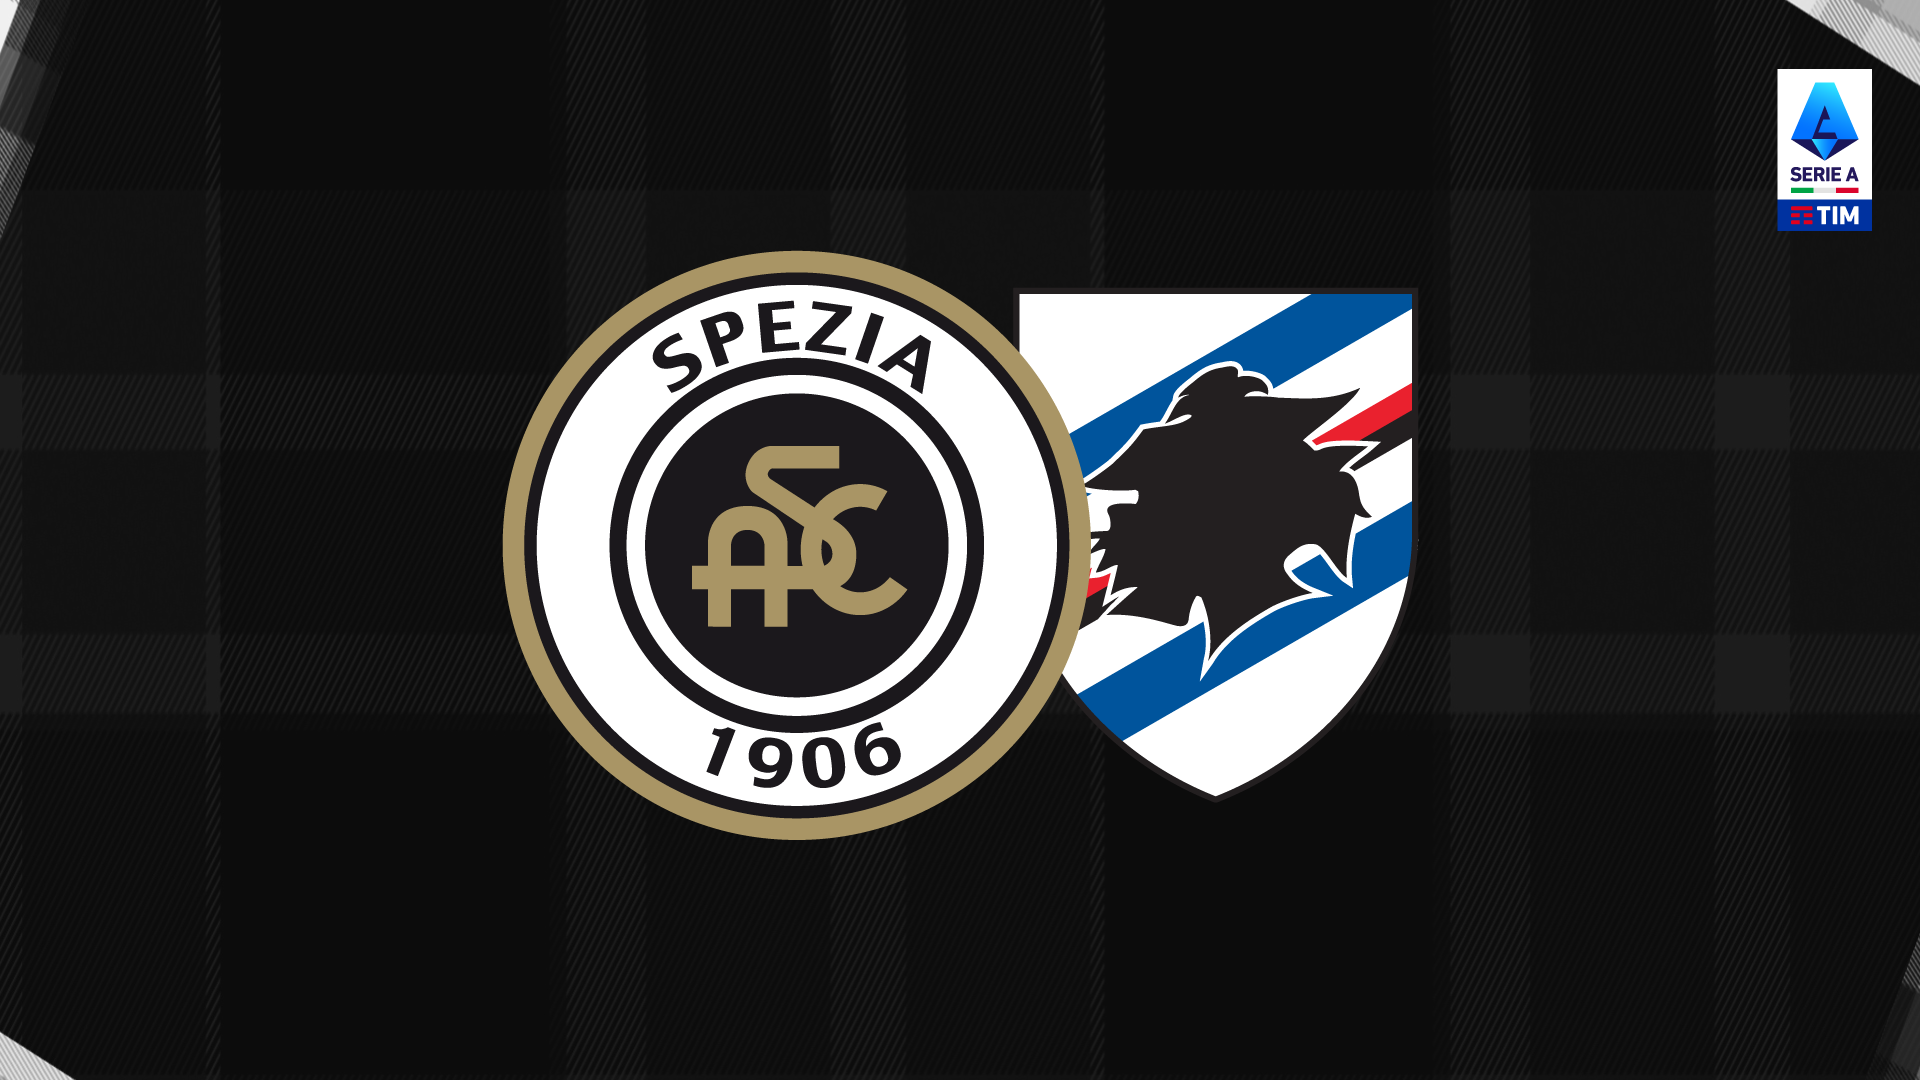 Spezia-Sampdoria: first sales phase available from September 5